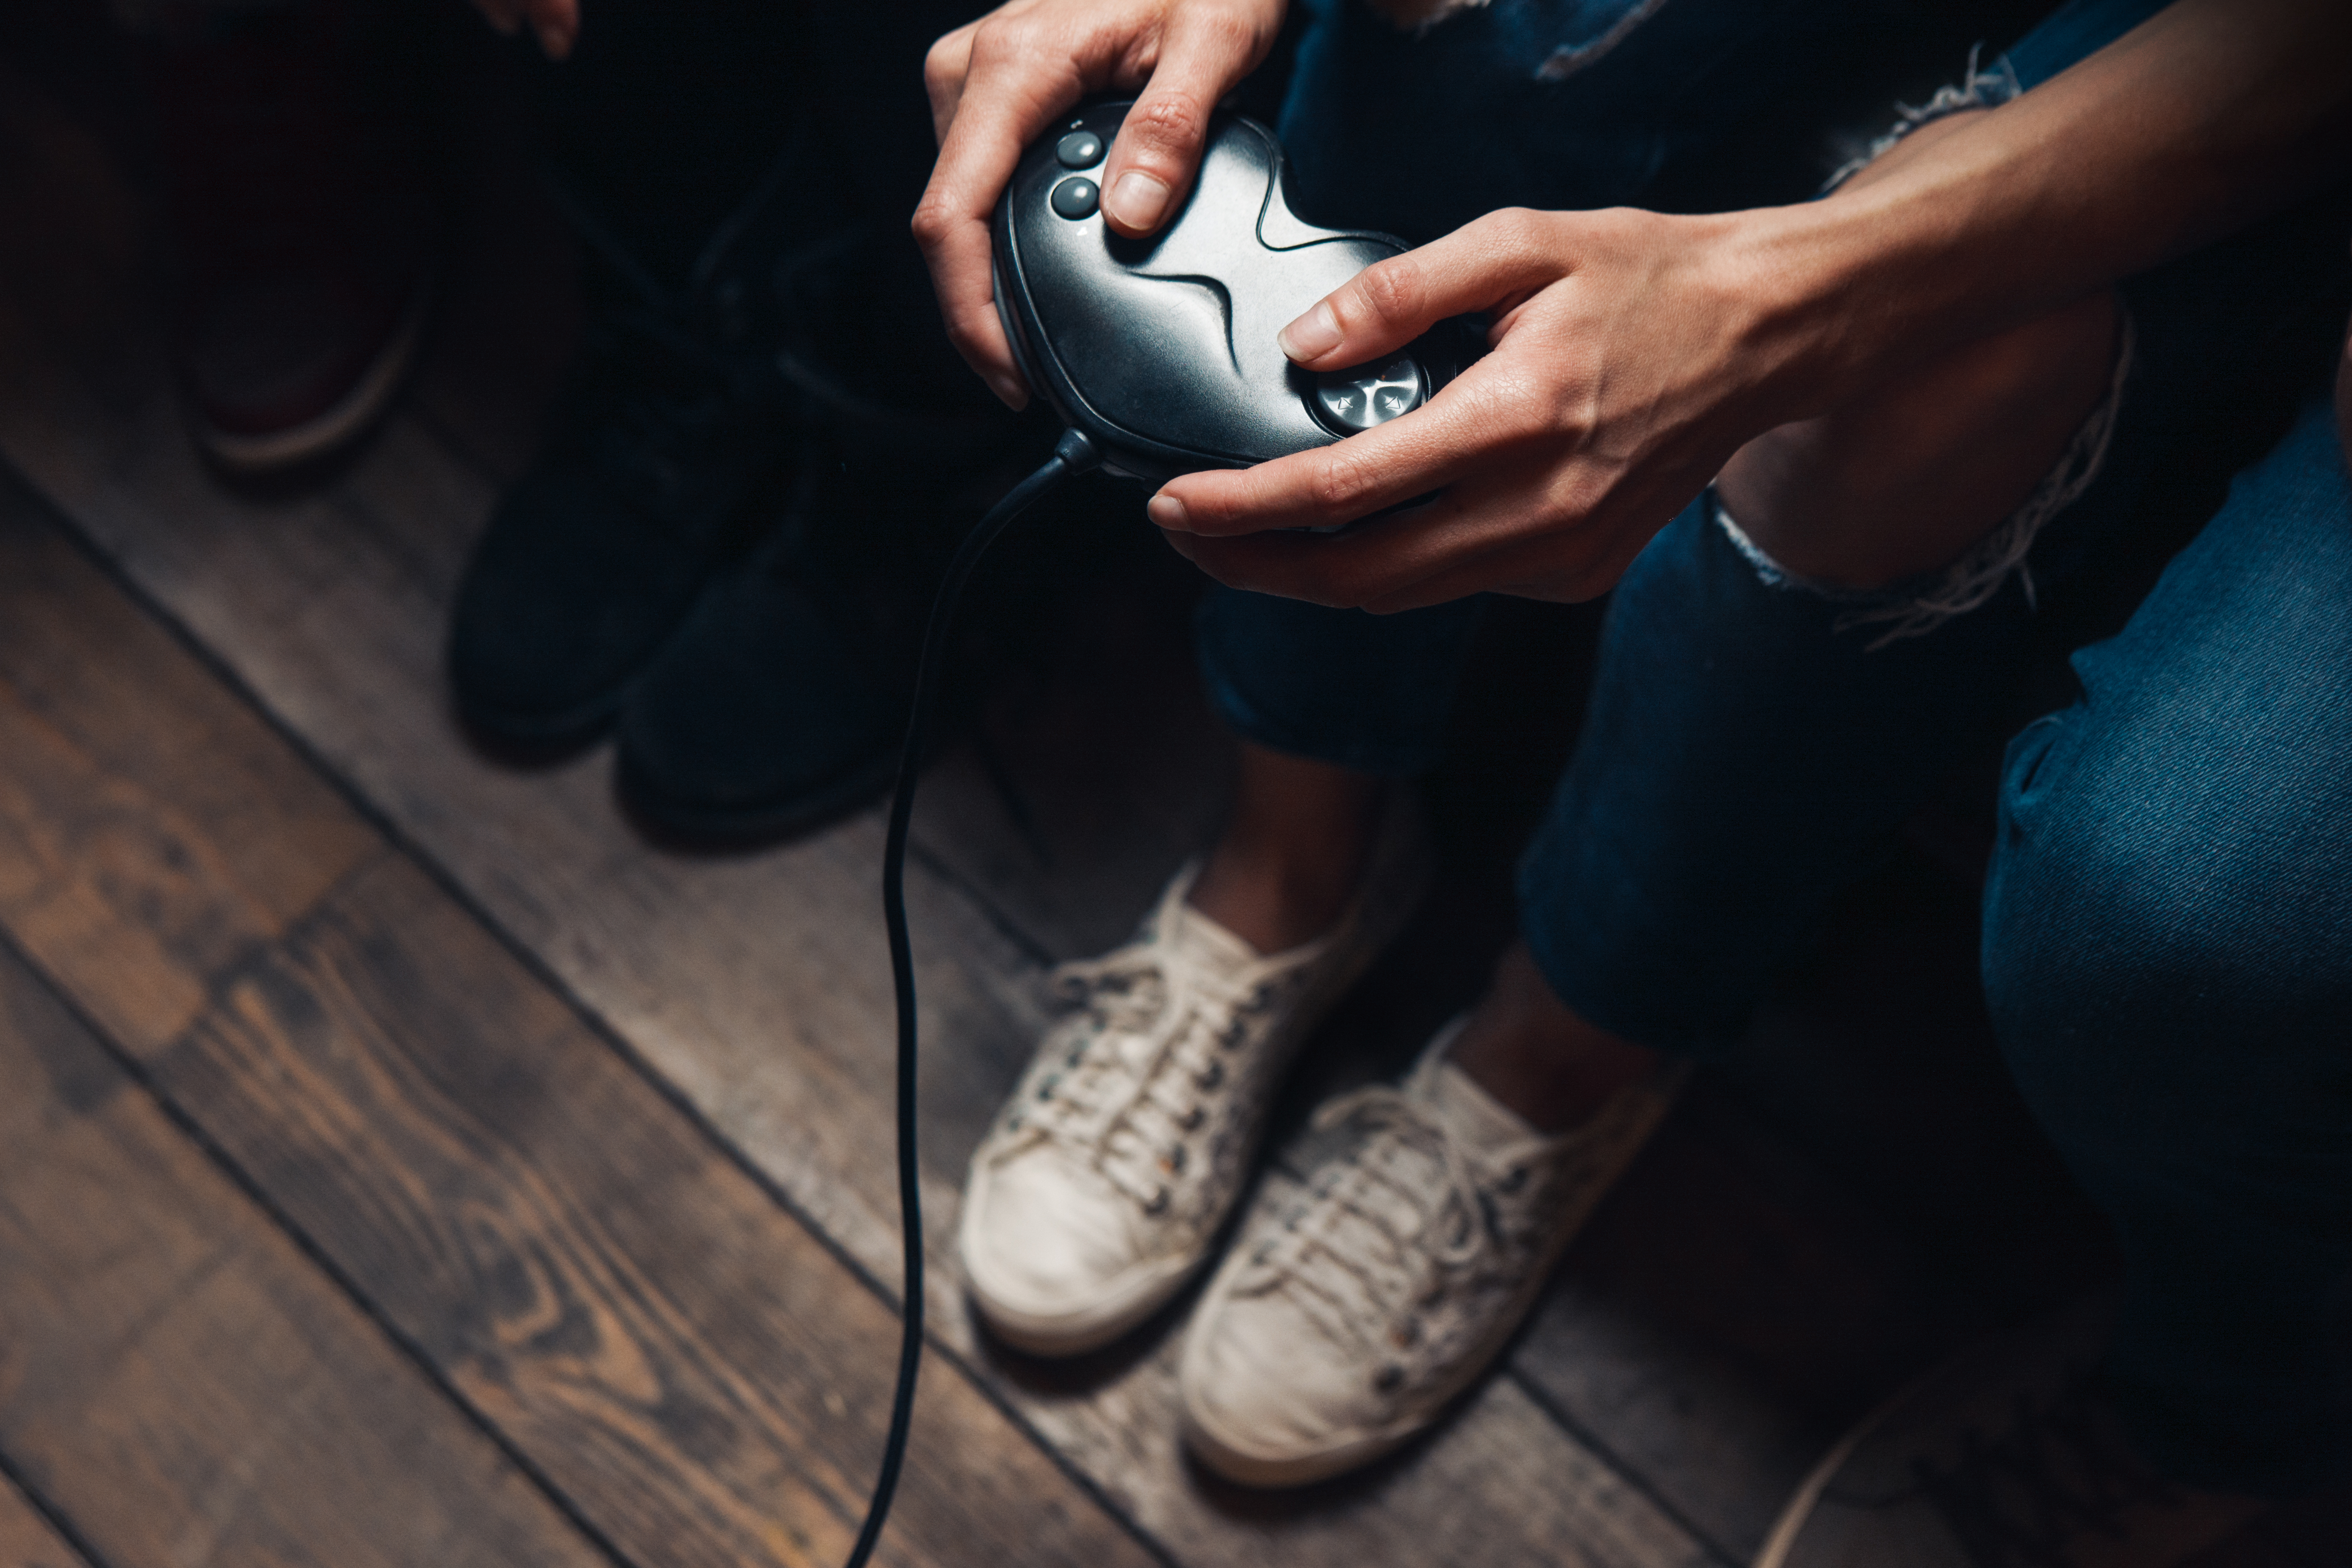 Video game addiction. Excessive play, lifestyle